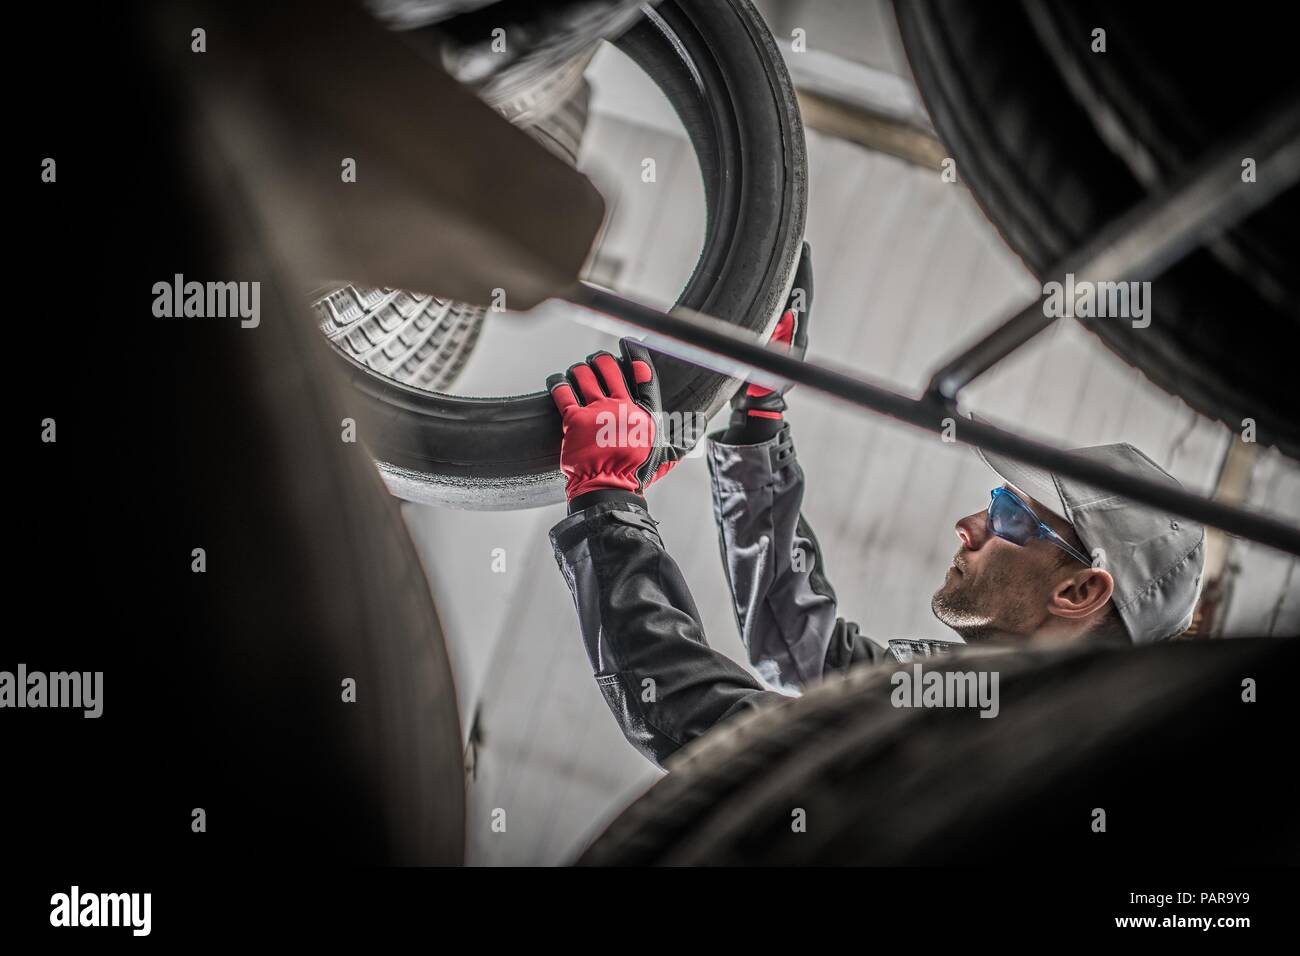 Vulcanizing Services Worker. Tires and Alloy Wheels Sales. Caucasian Vulcanization Technician Removing Tire From the Storage Shelf. Stock Photo